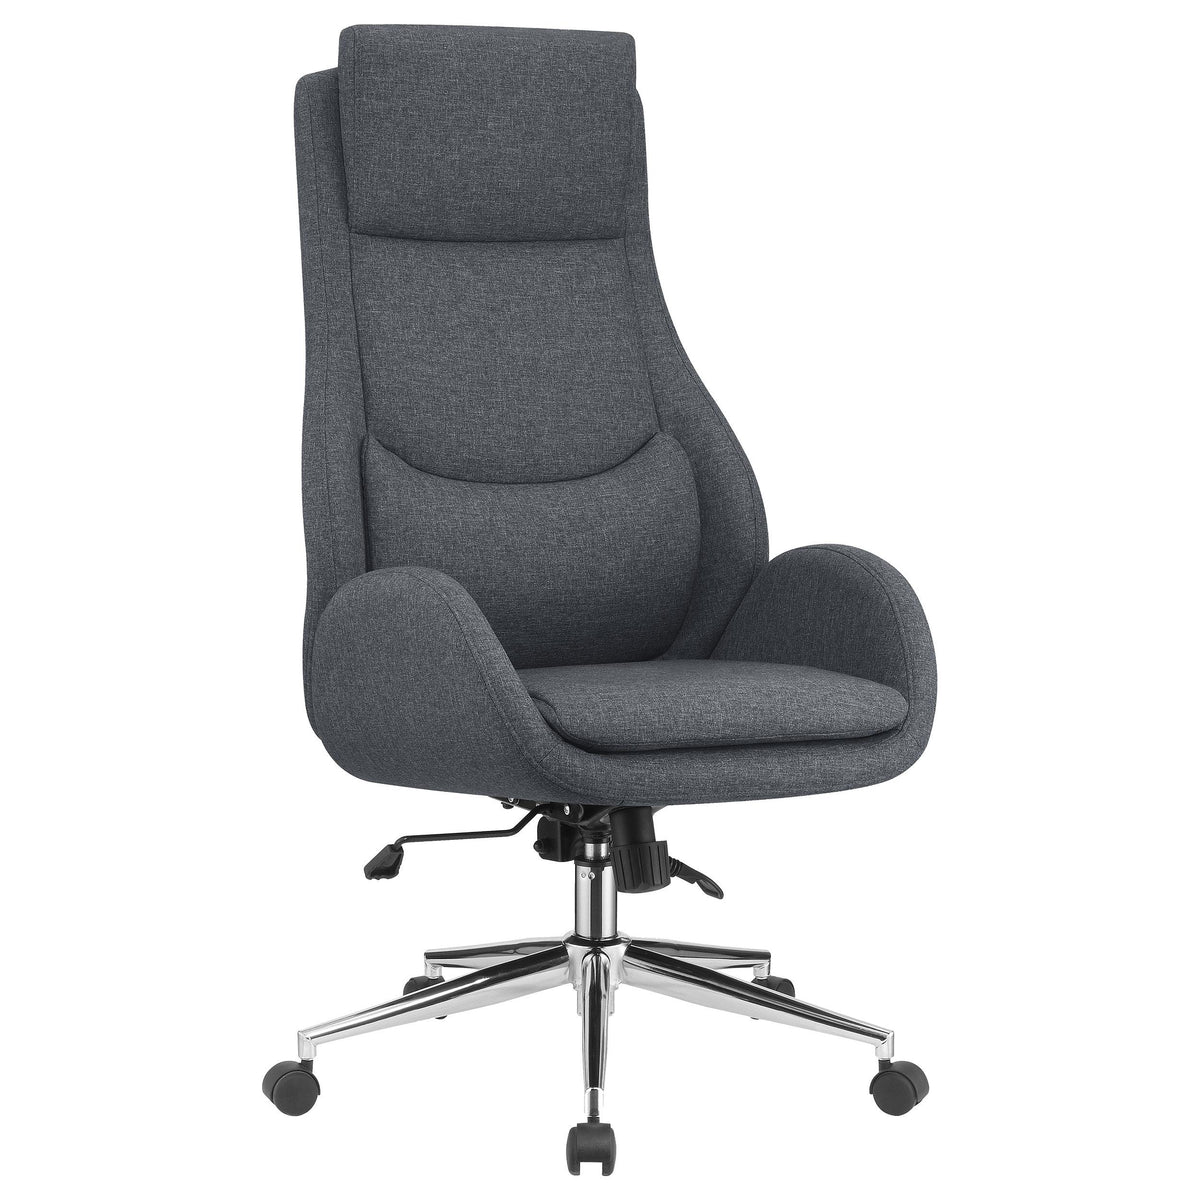 Cruz Upholstered Office Chair with Padded Seat Grey and Chrome  Half Price Furniture